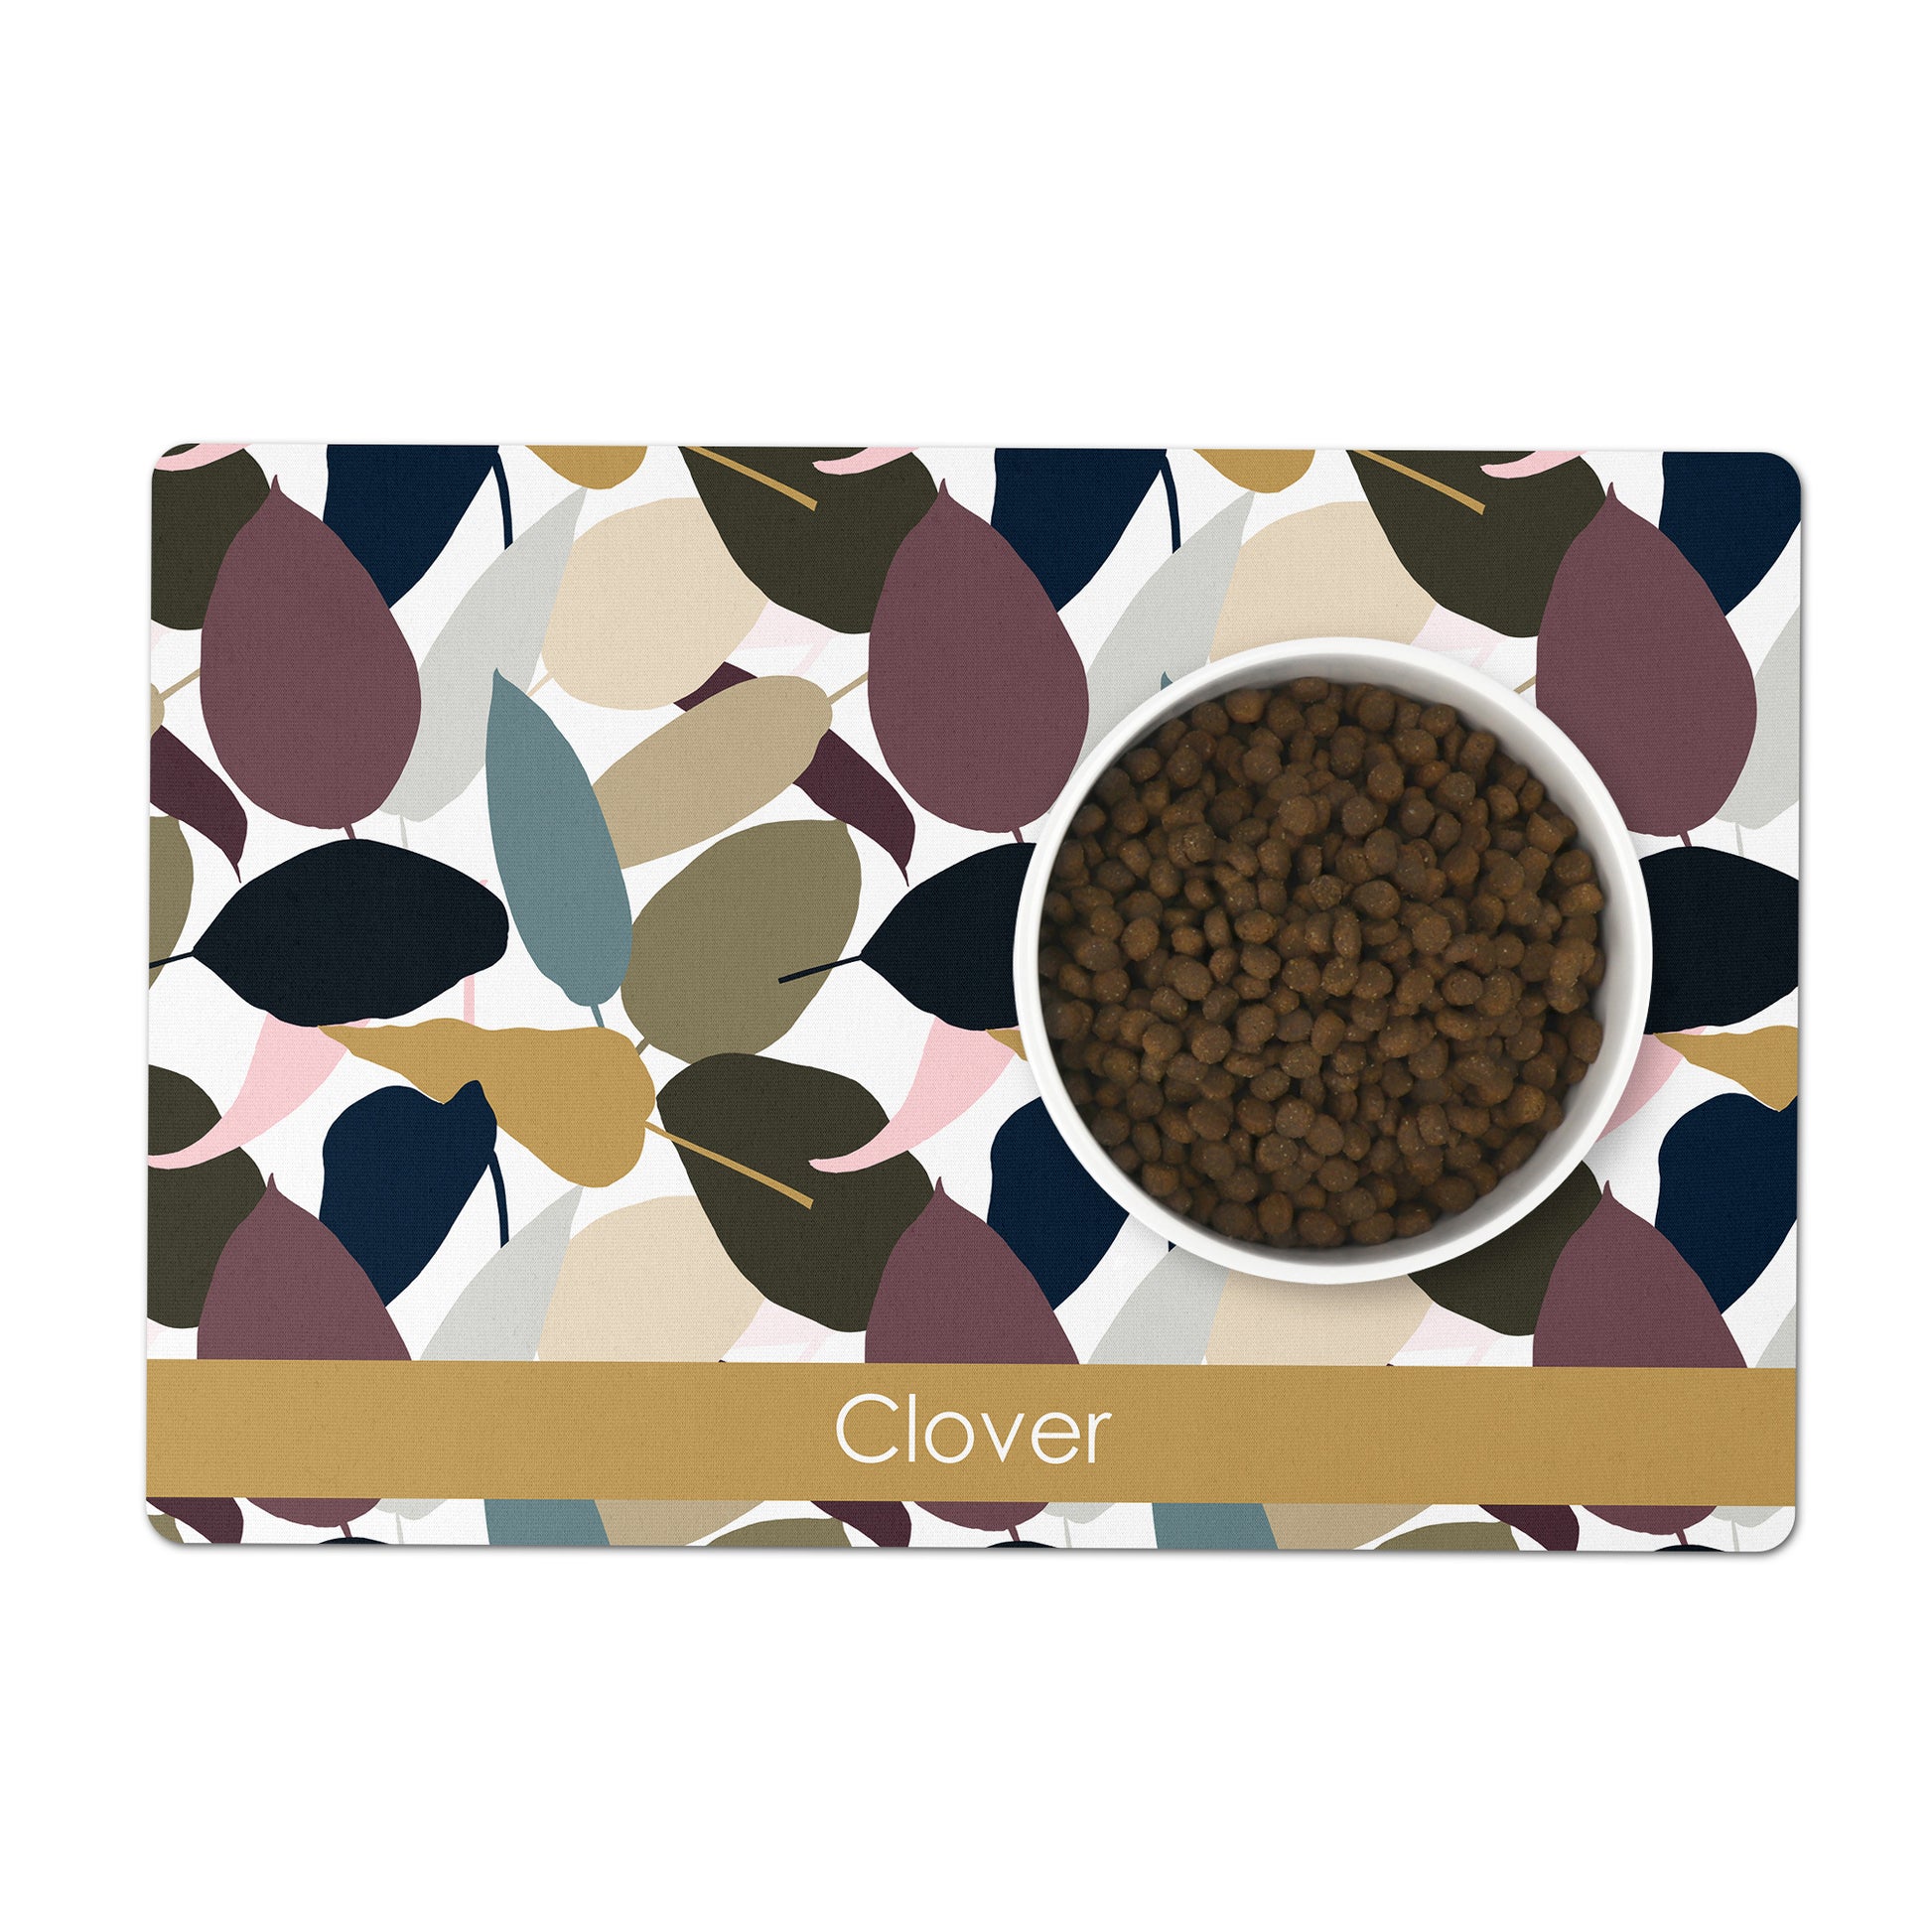 Colorful modern leaf print pet feeding mat personalized for your dog or cat with any name or word.